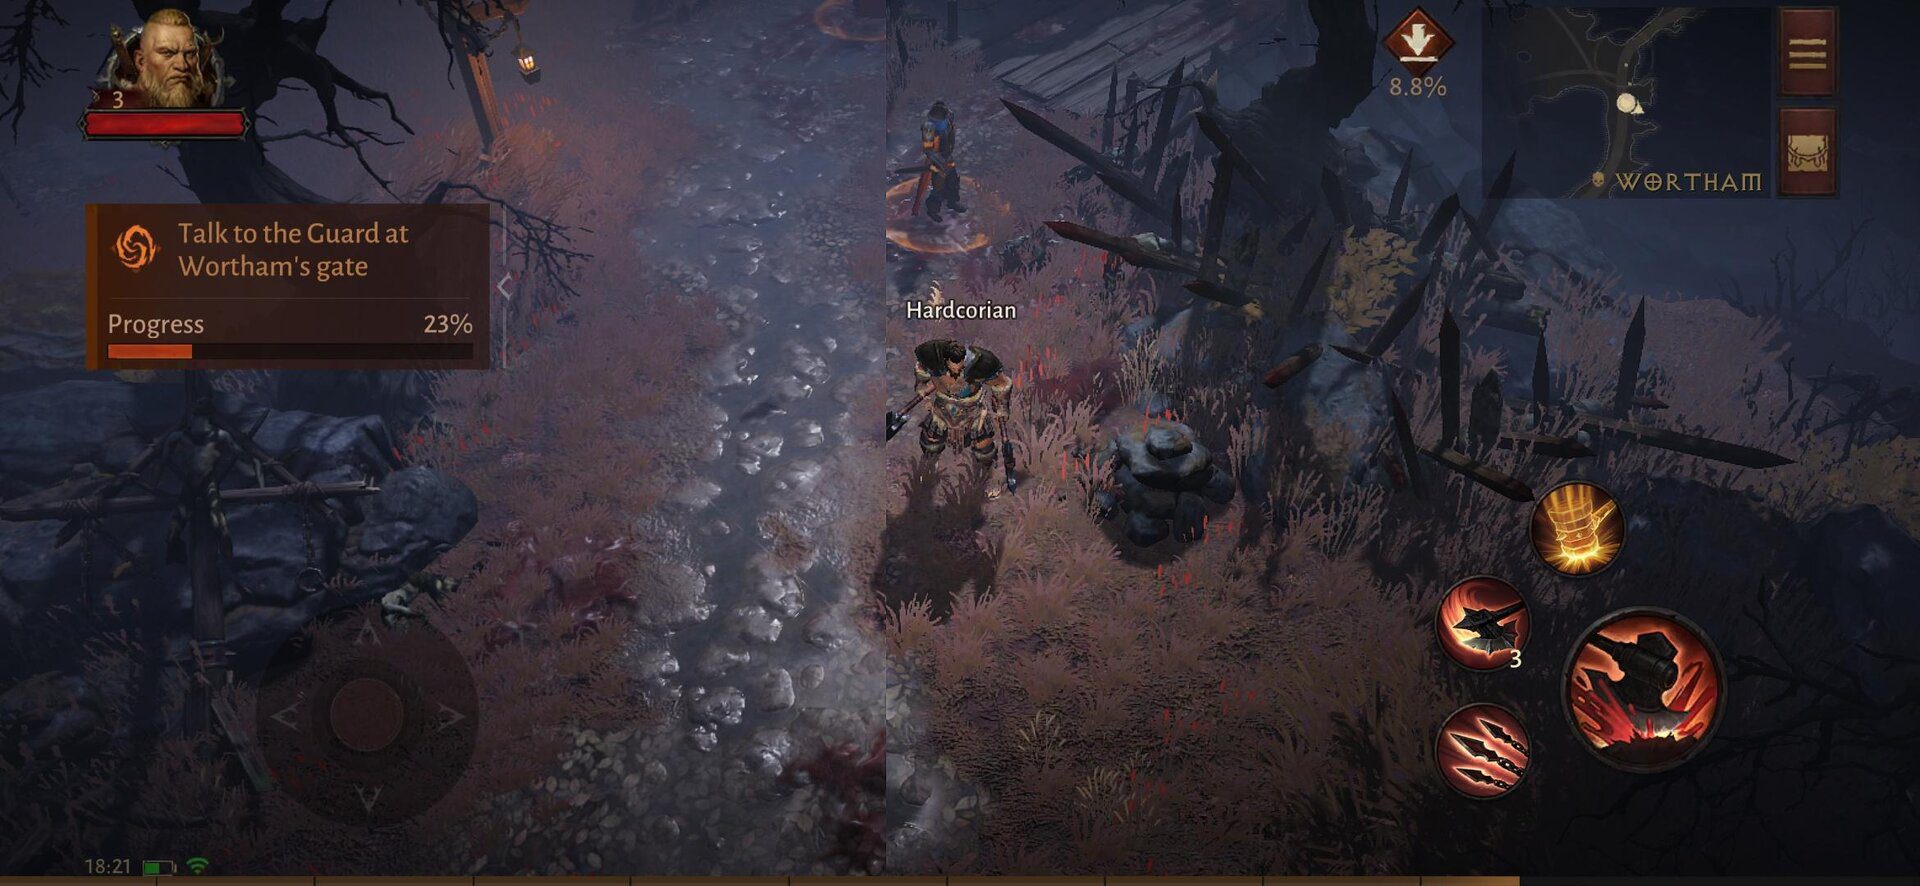 Graphics problem in Diablo Immortal on Samsung smartphone with Exynos APU